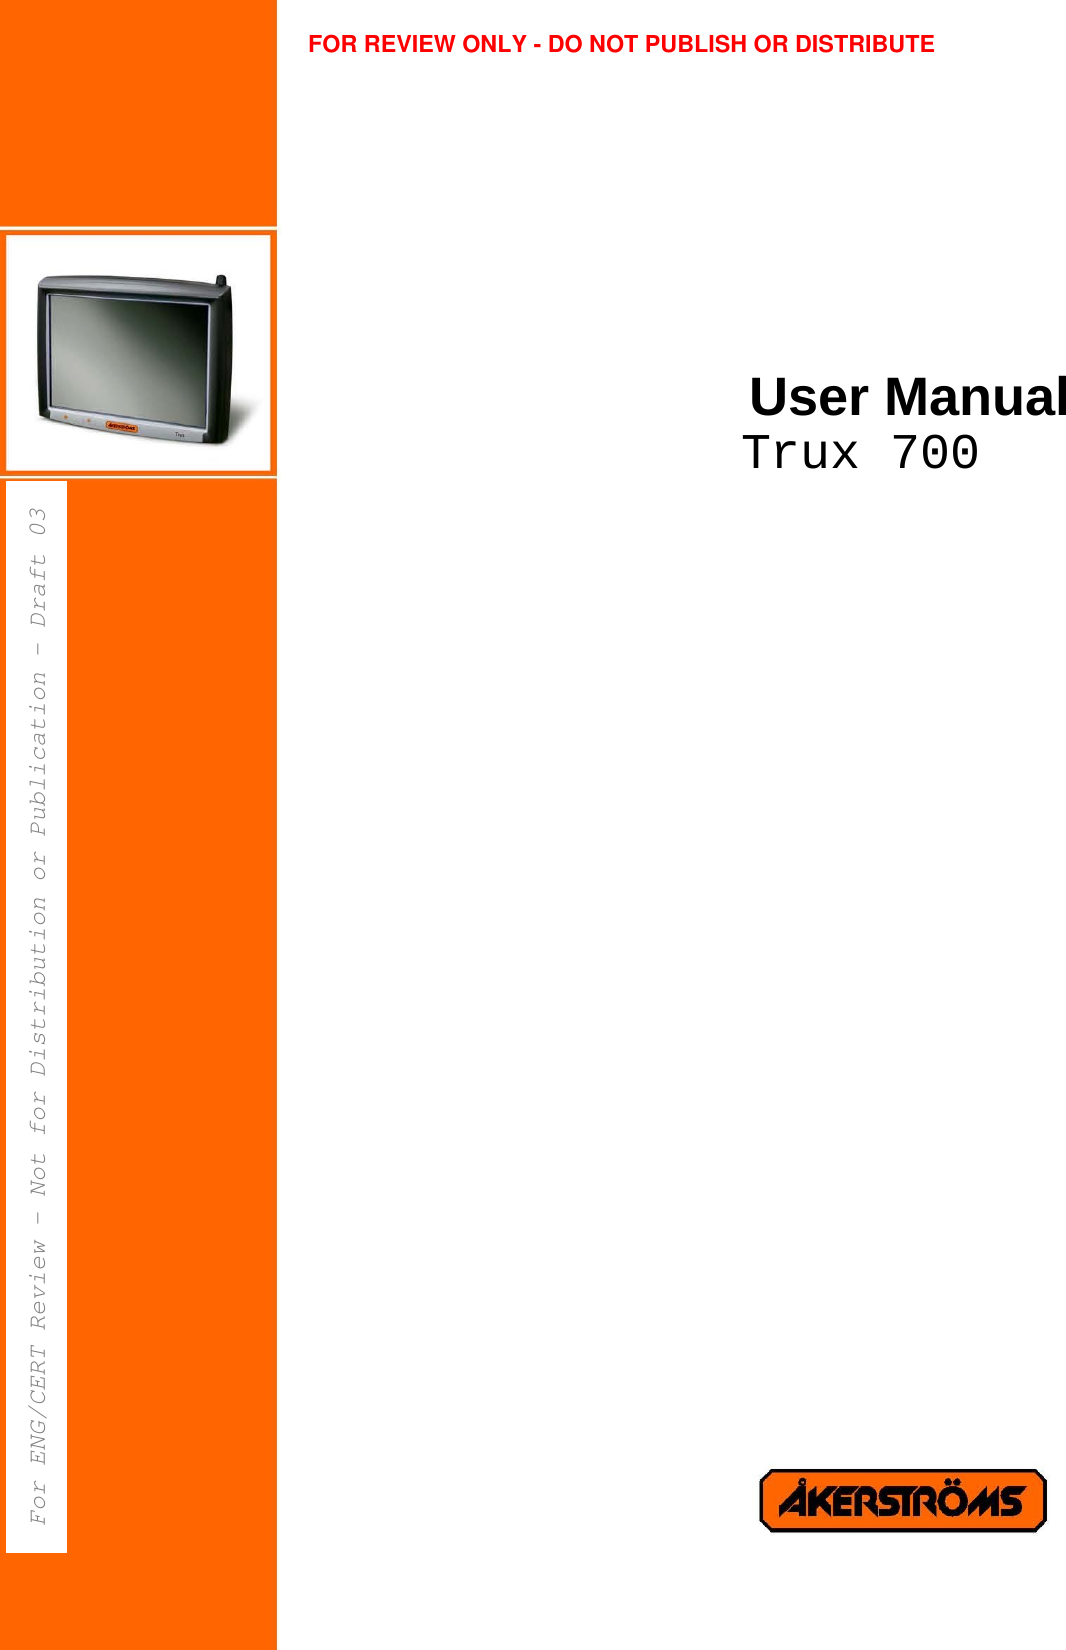      User Manual Trux 700  FOR REVIEW ONLY - DO NOT PUBLISH OR DISTRIBUTEFor ENG/CERT Review - Not for Distribution or Publication - Draft 03